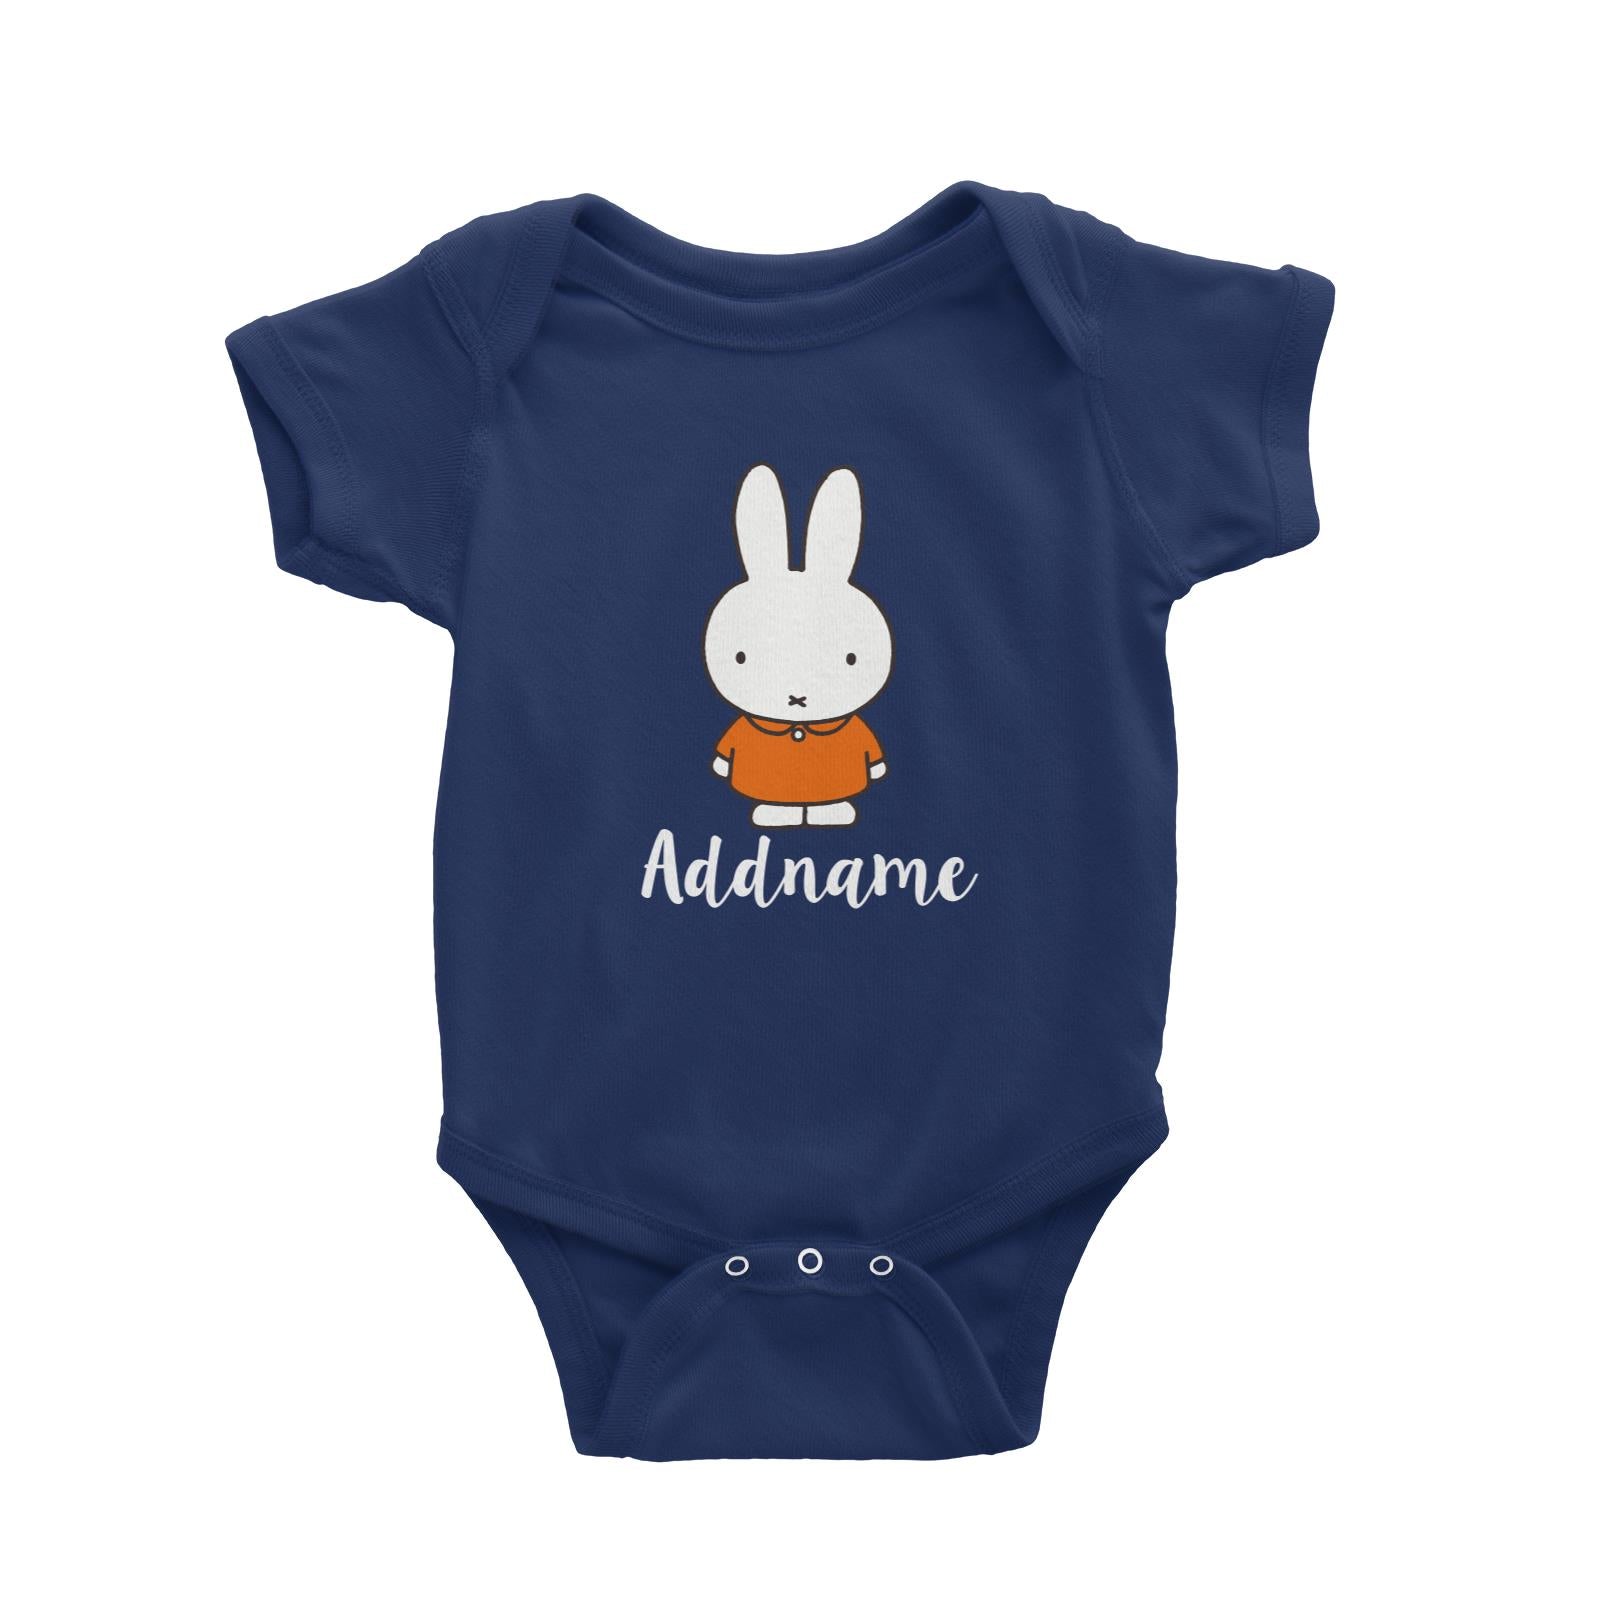 Miffy 2 Addname Baby Romper